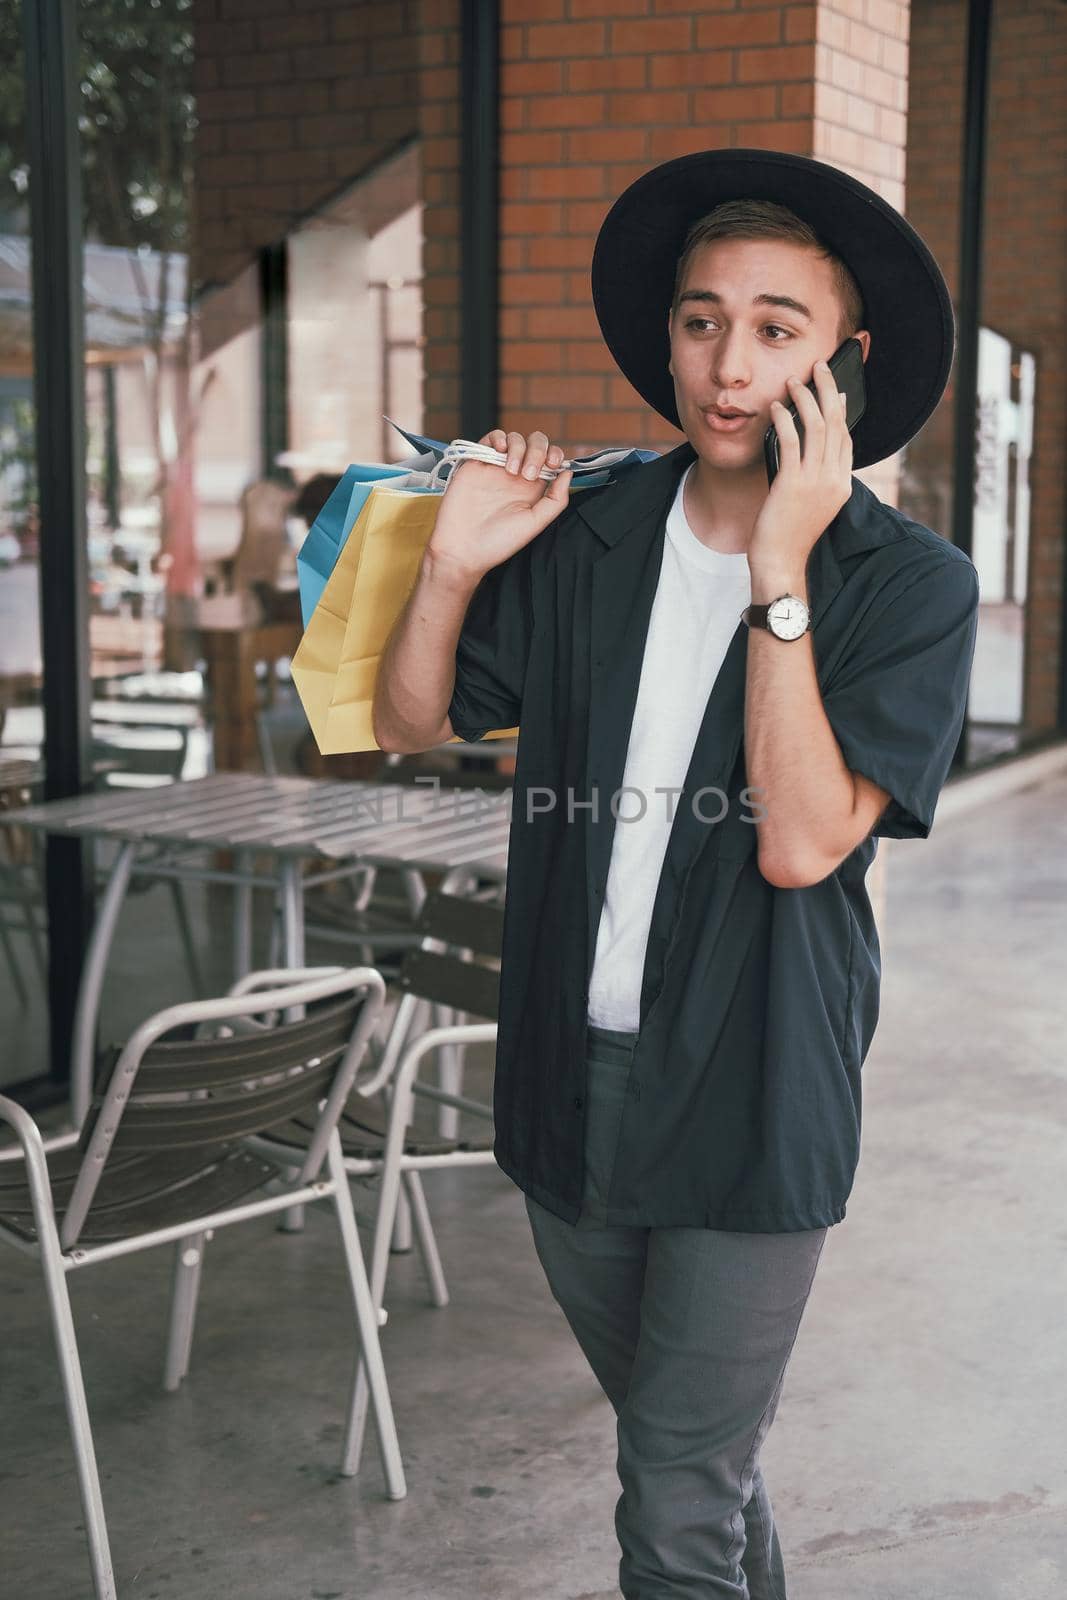 man holding shopping bags & talking on mobile smart phone.  by pp99